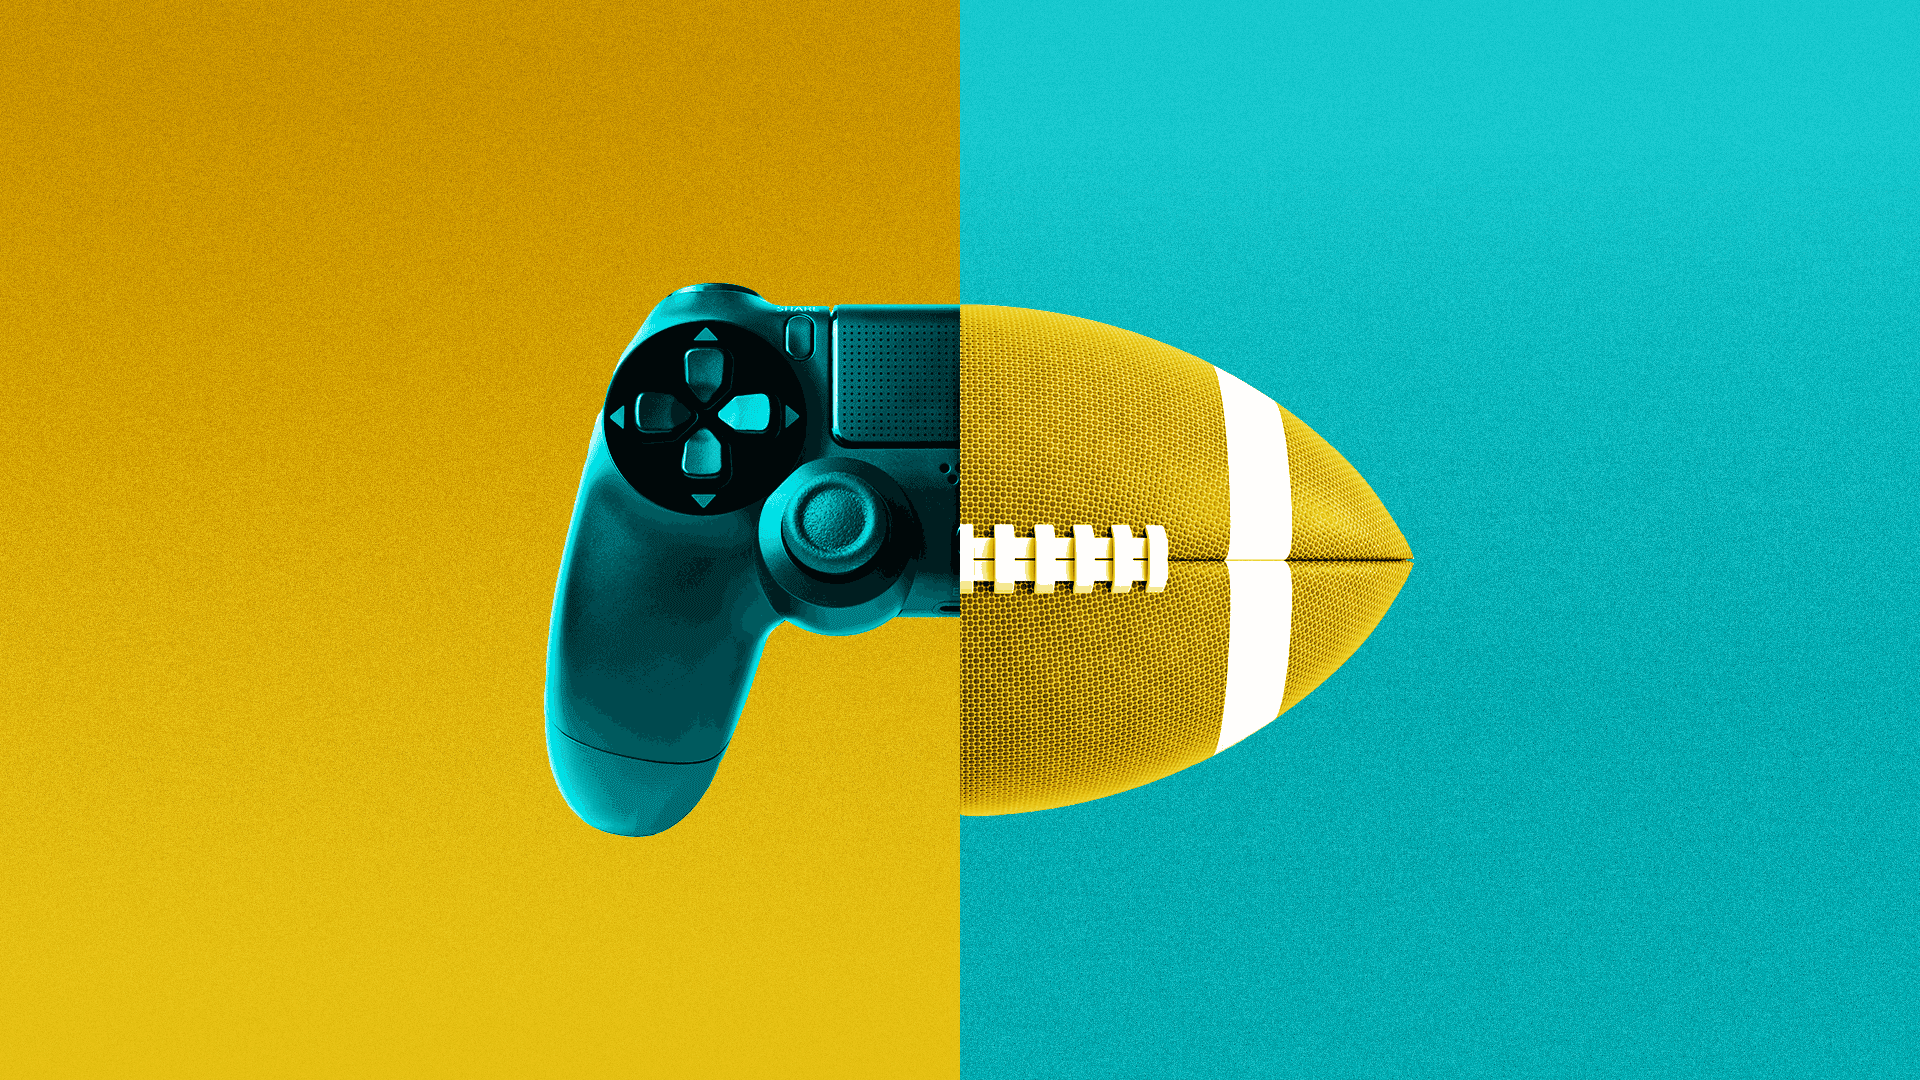 An illustration of a gaming console controller and football